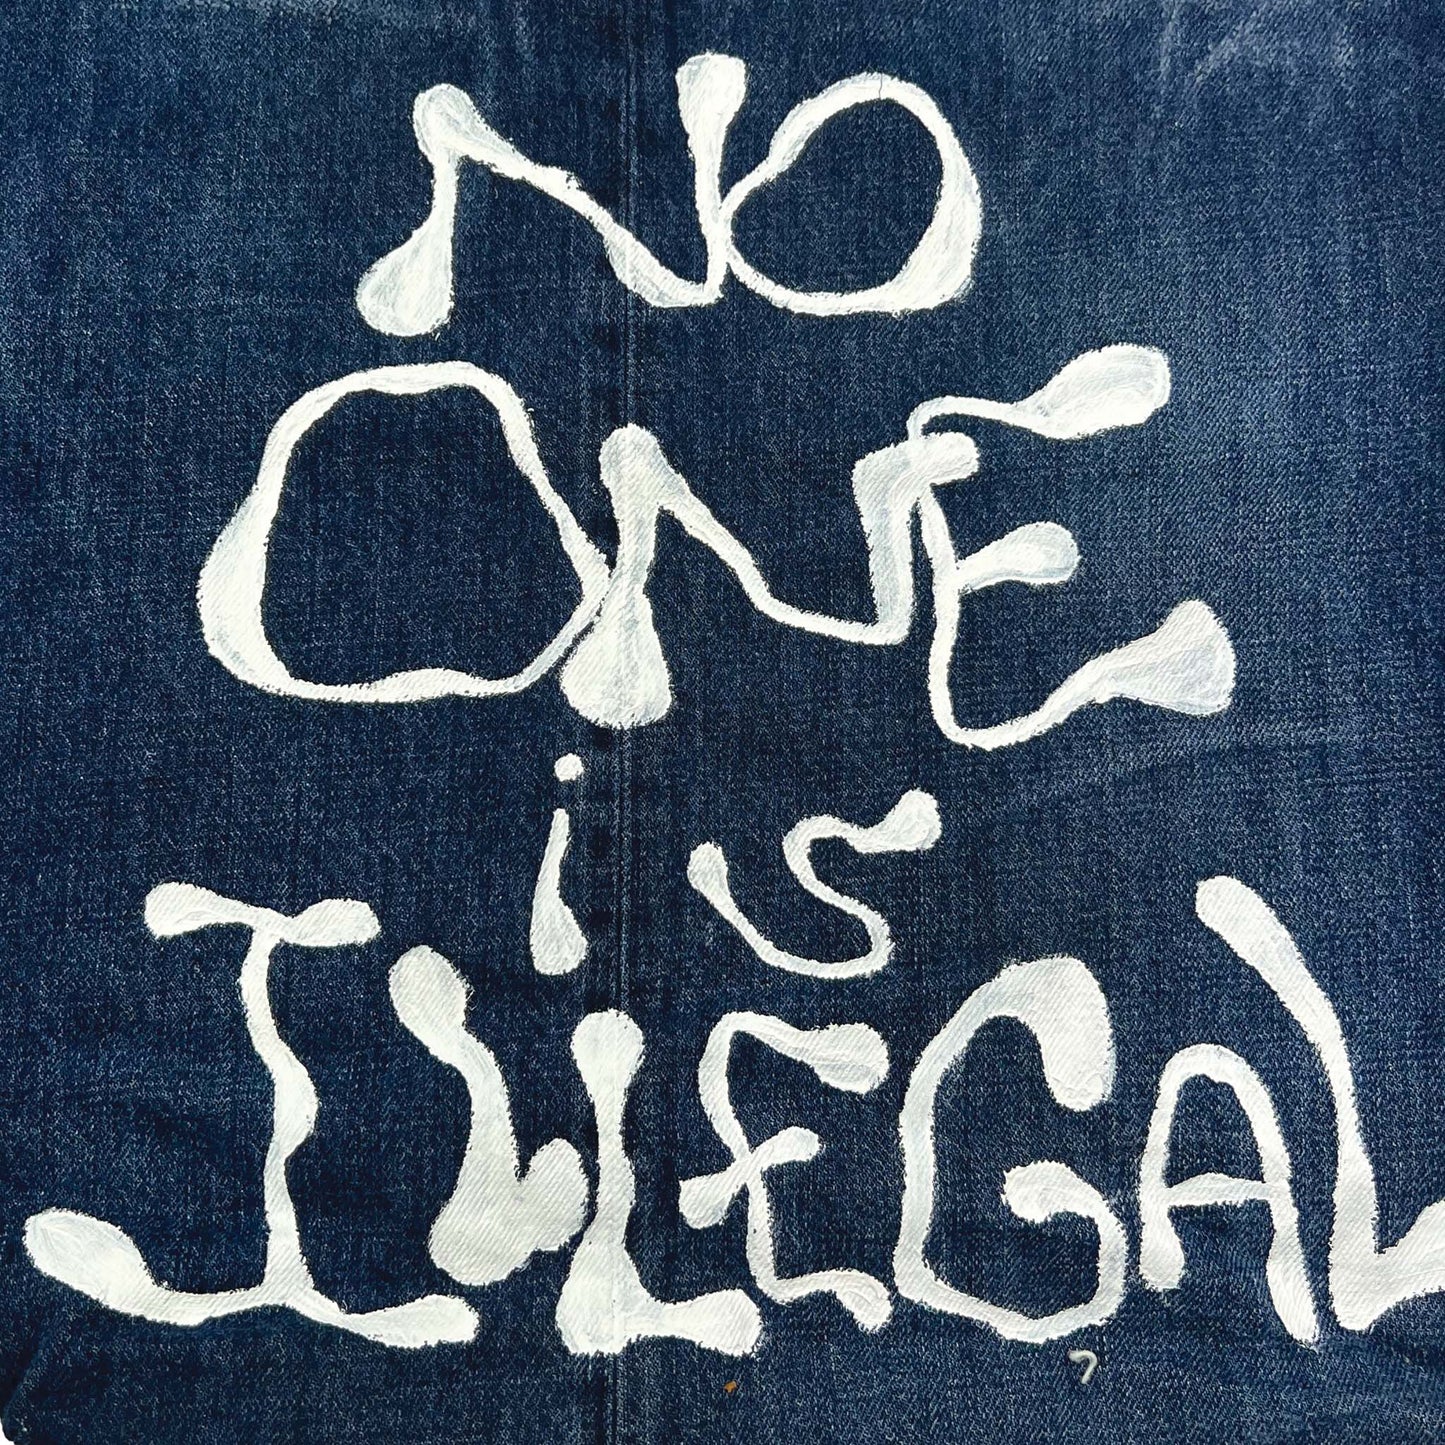 Denim Record Tote w Ozwick - No One is Illegal -